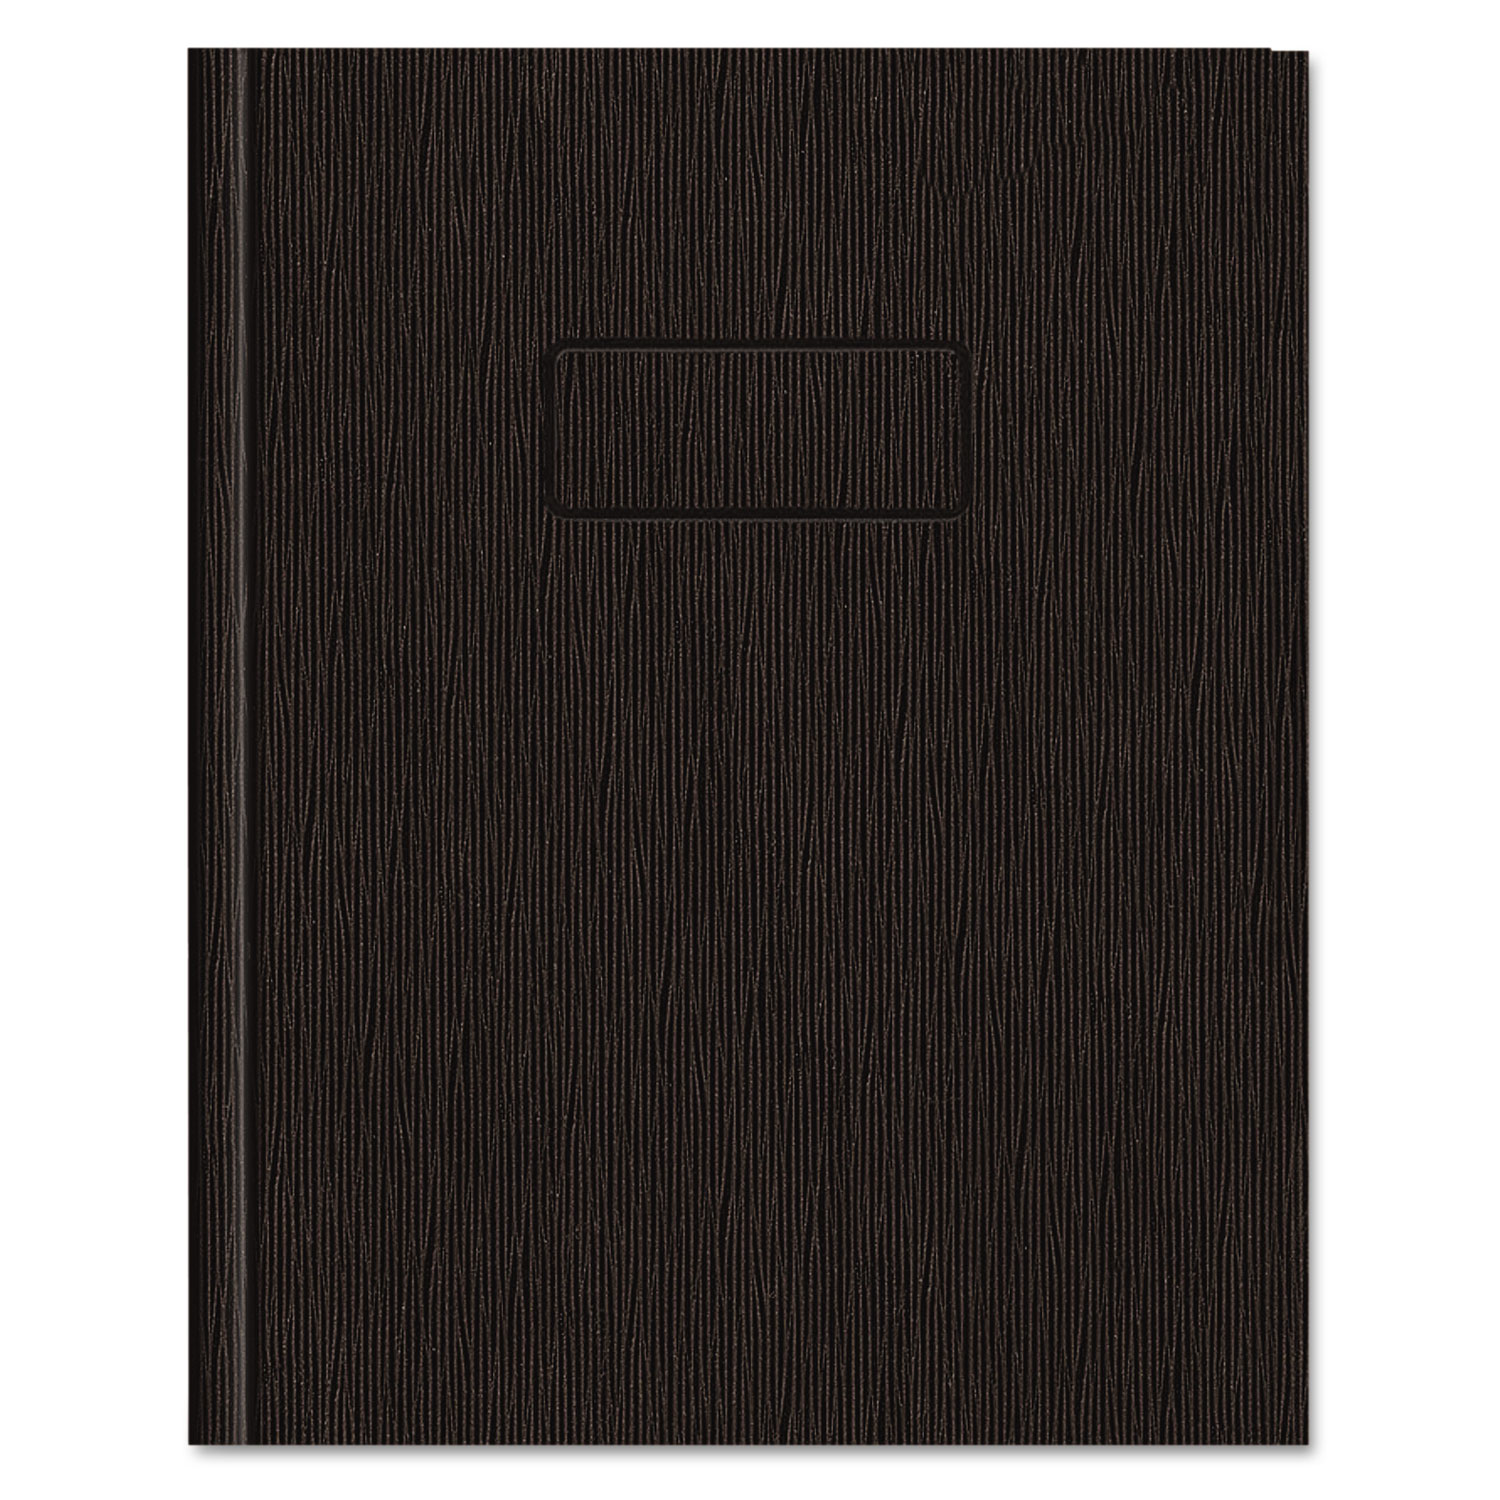 EcoLogix Professional Notebook, Medium/College Rule, Black, 9.25 x 7.25, 75 Pages